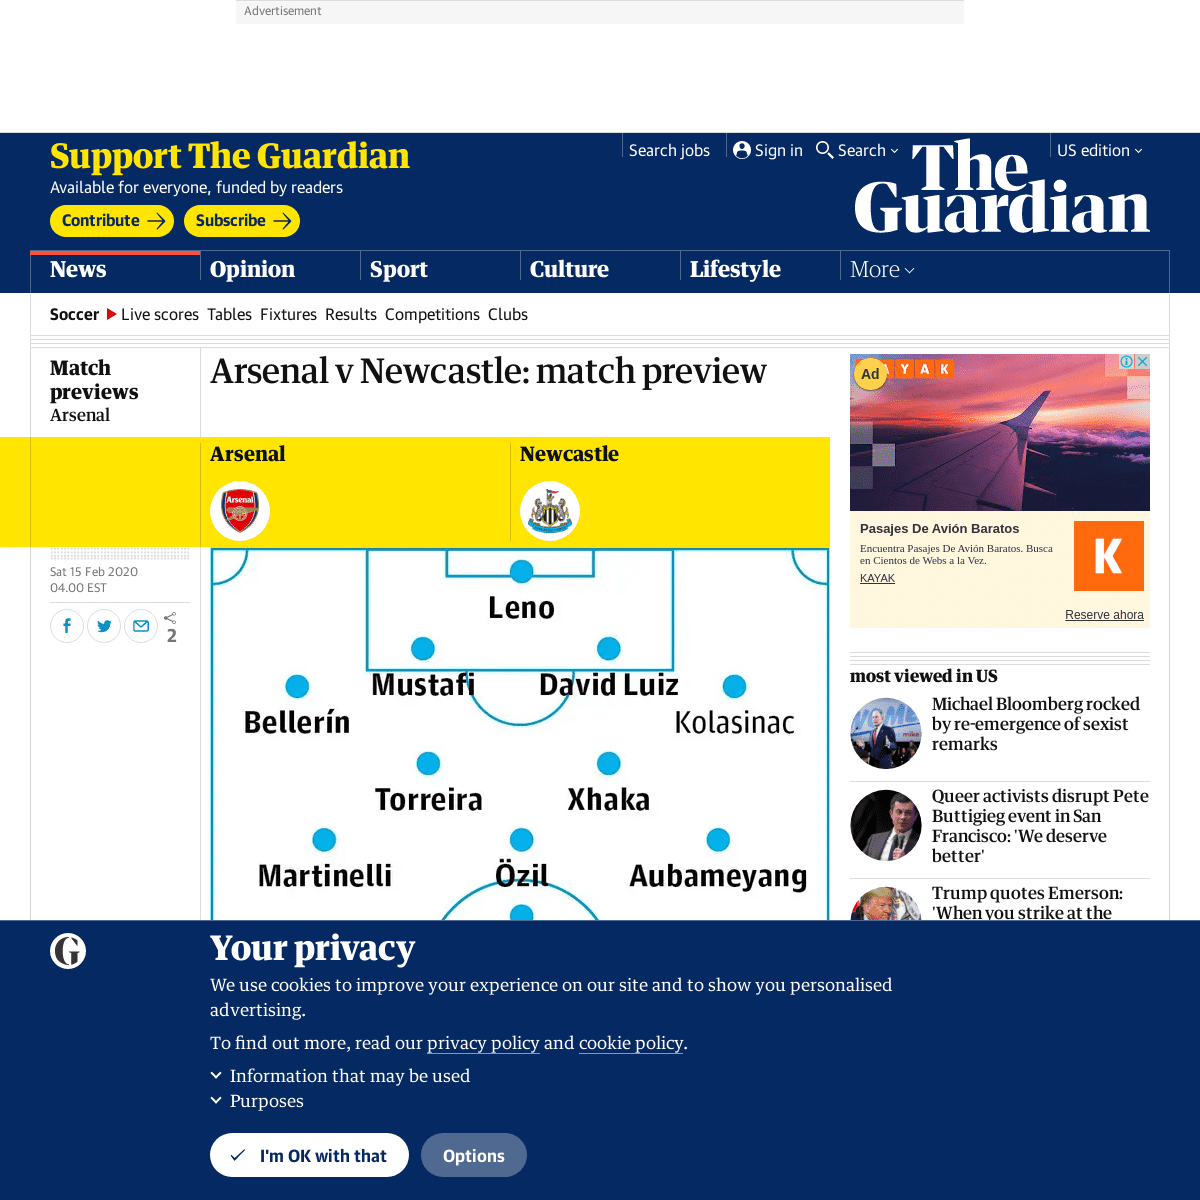 A complete backup of www.theguardian.com/football/2020/feb/15/arsenal-newcastle-match-preview